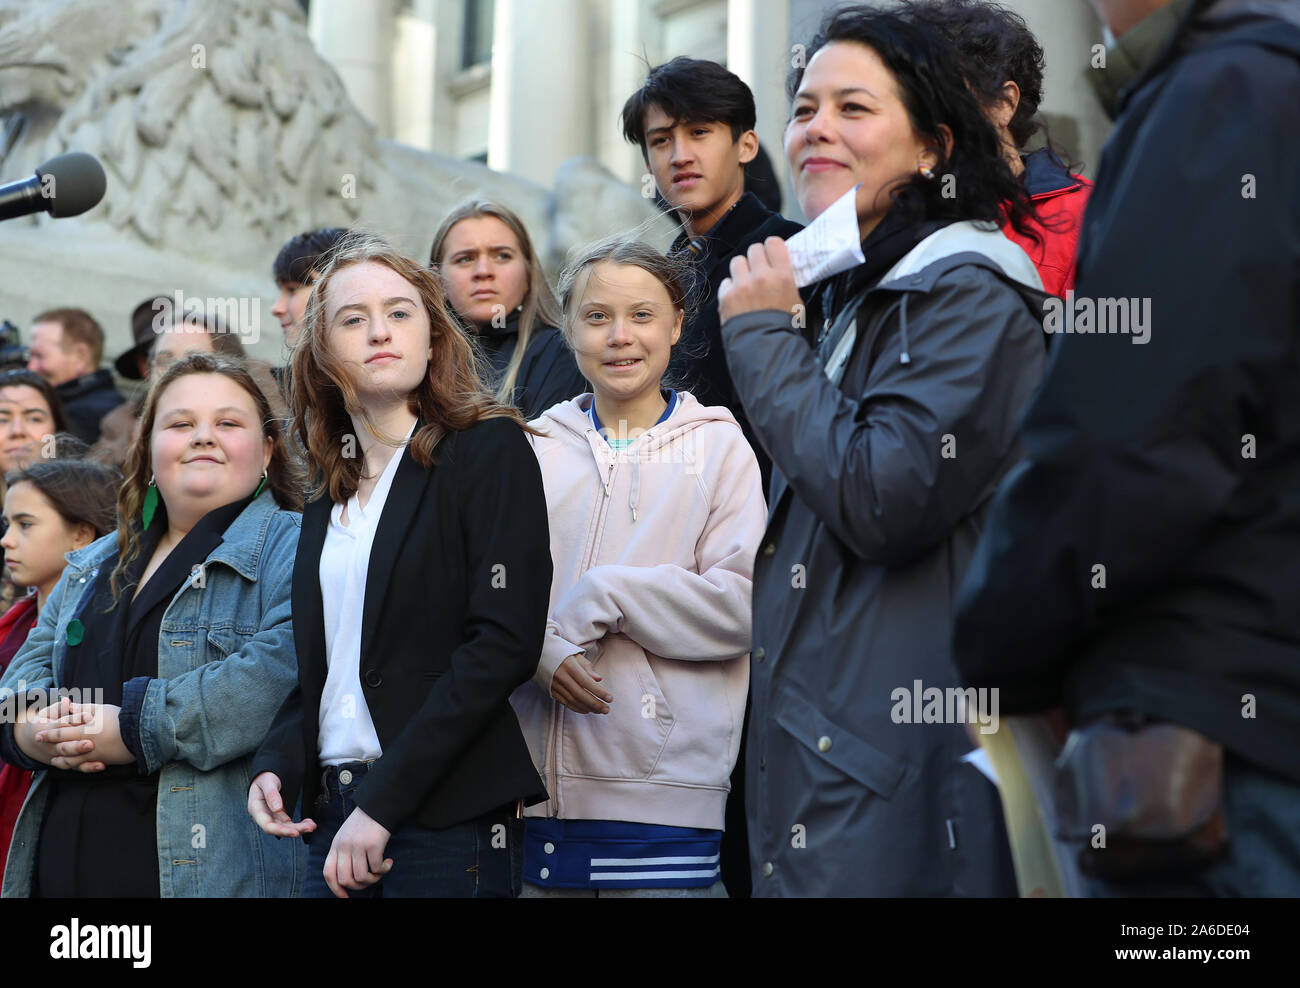 Swedish teen activist Greta Thunberg (pink) arrives for the post federal election Friday climate strike march starting and ending at the Vancouver Art Gallery in Vancouver, British Columbia on October 25, 2019. Organized by local youth-led, Sustainabiliteens, Greta and a turn out of nearly 10,000 climate activists demand action from industry and the various levels of government and are supporting the 15-youth who announced their plans to sue the federal government alleging it has contributed to climate change. Photo by Heinz Ruckemann/UPI Stock Photo